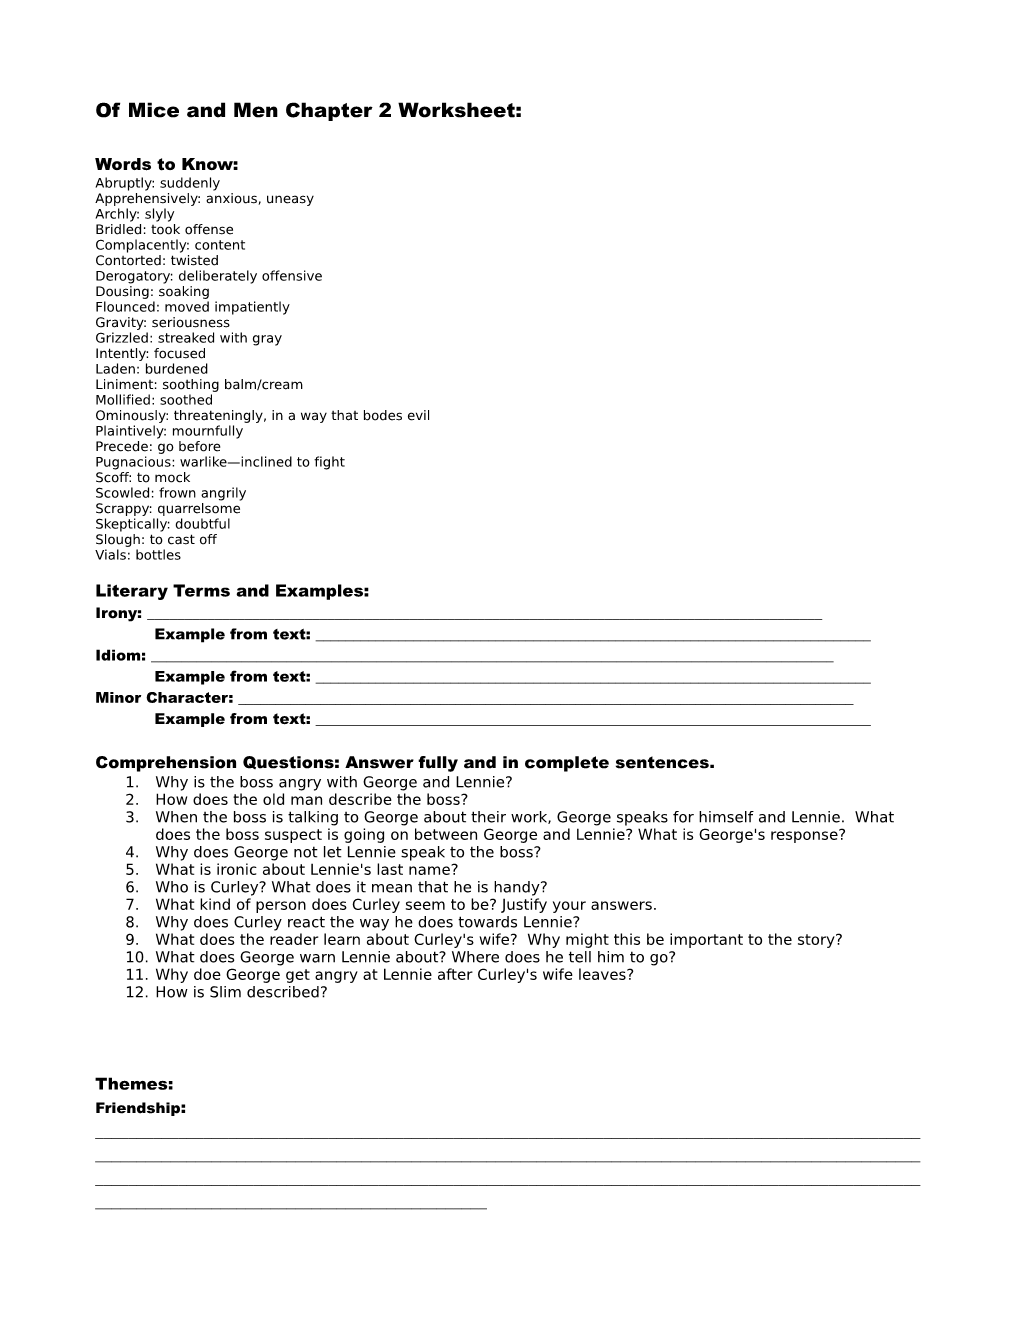 Of Mice and Men Chapter 2 Worksheet